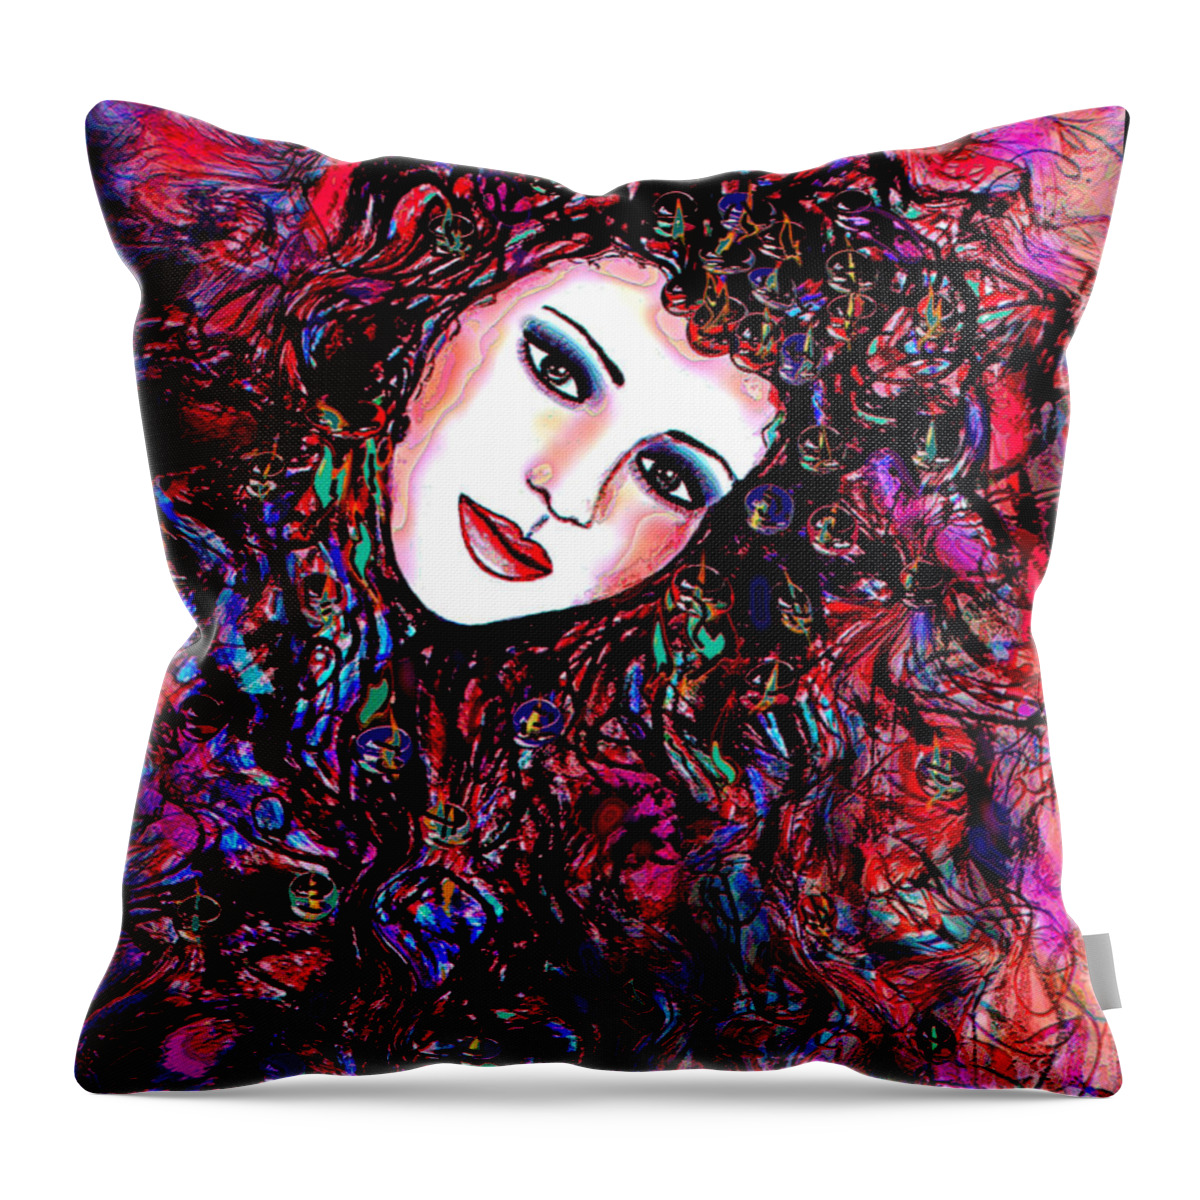 Woman Throw Pillow featuring the painting Free Spirit by Natalie Holland